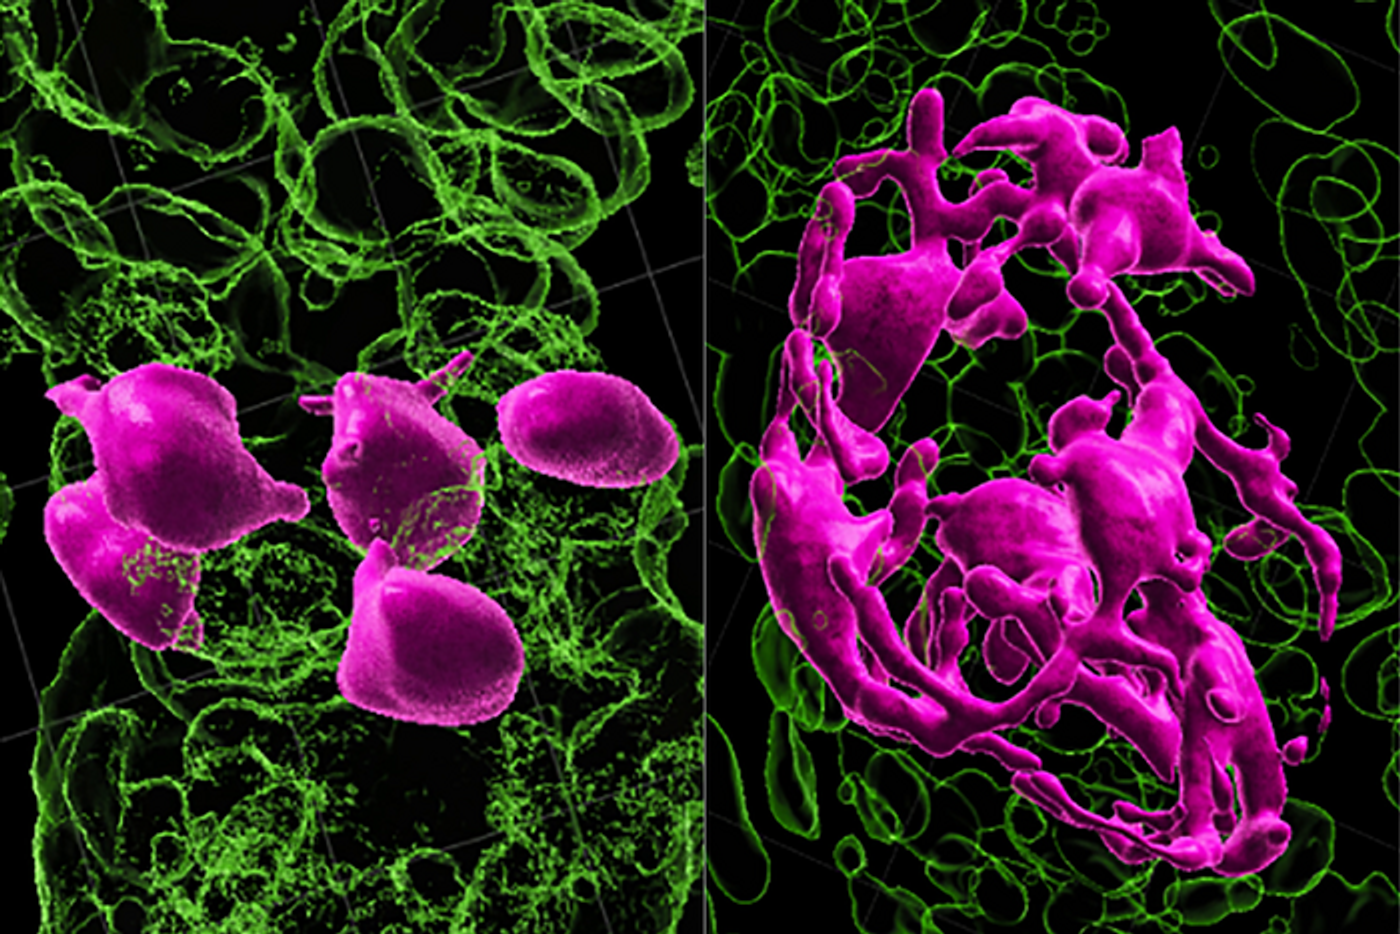 Hair-coloring stem cells (at left, in pink) need to be in the hair germ compartment in order to be activated (at right) to develop into pigment. Credit  Courtesy of Springer-Nature Publishing or the journal Nature